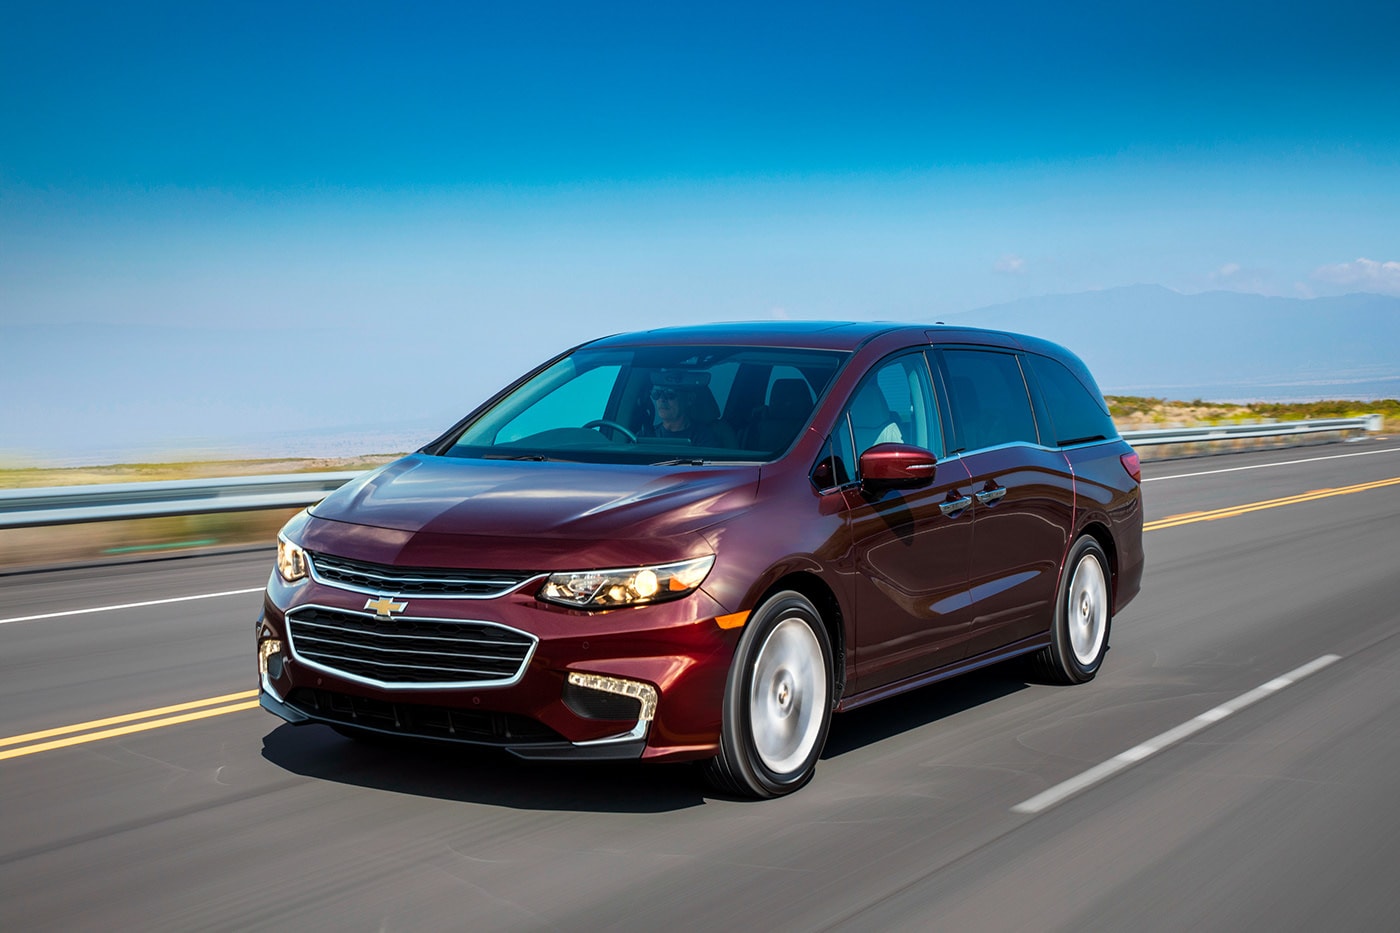 New Chevrolet Minivan Imagined With 